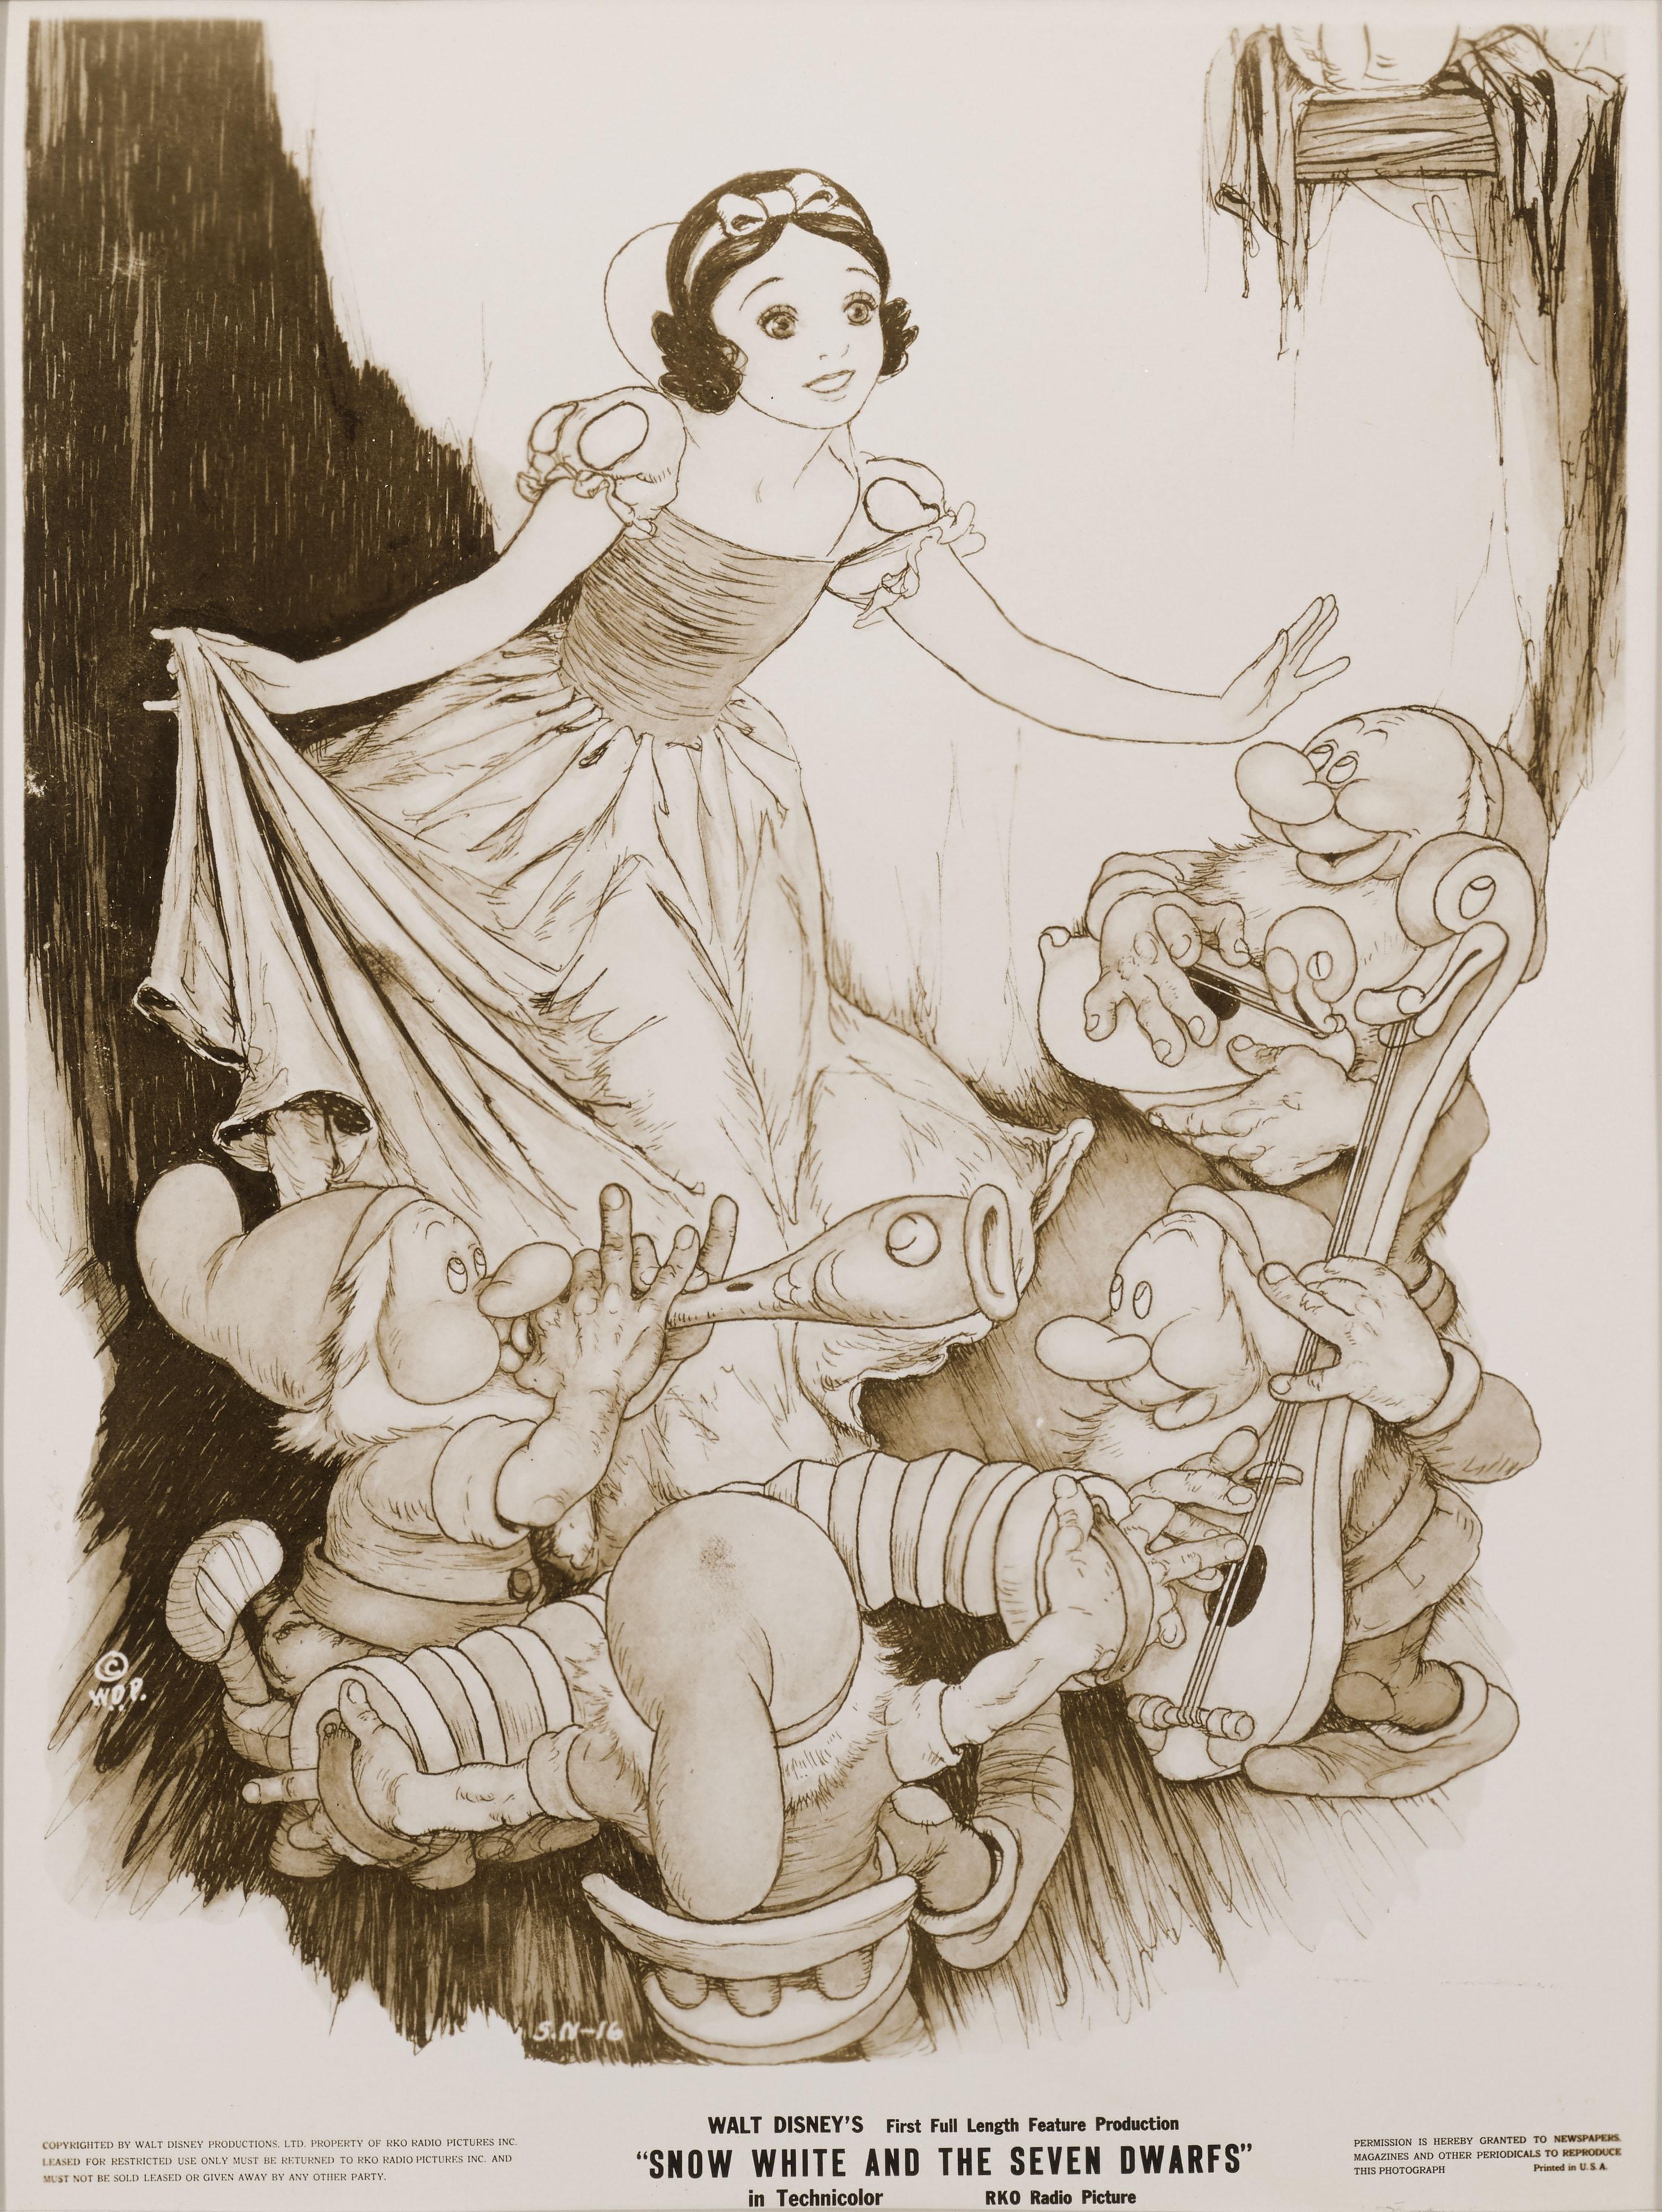 Original photographic production still for Snow White and the Seven Dwarfs 1937.
This piece features Tenggren art.
This piece would have been used to advertise and sent out to news agencies.
This was Walt Disney's first feature animation and when it